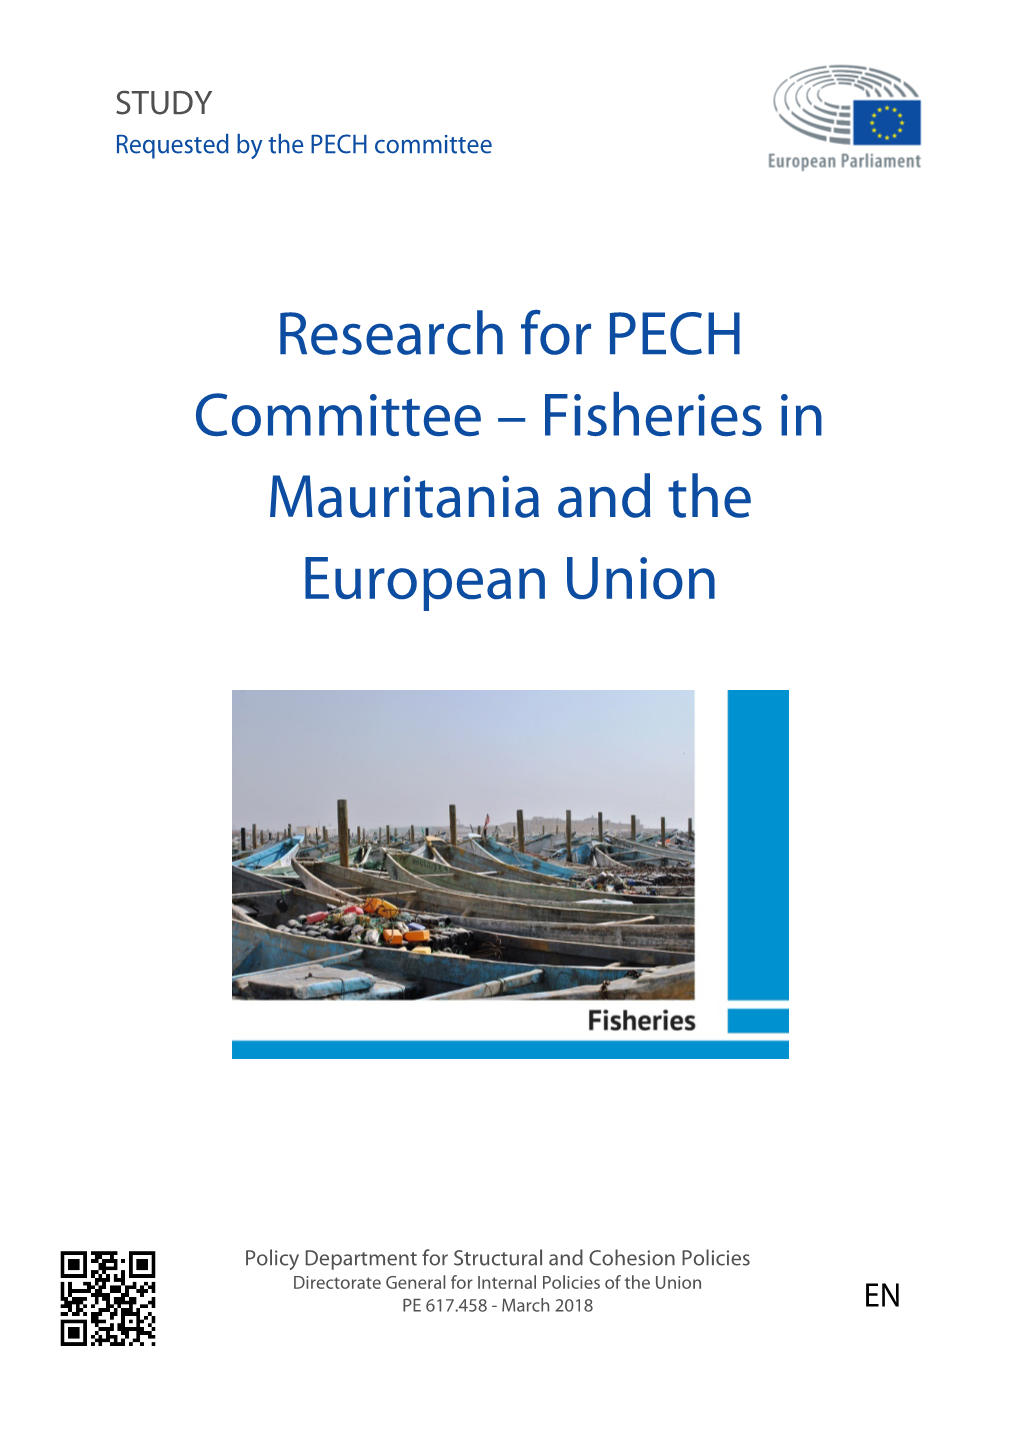 Research for PECH Committee – Fisheries in Mauritania and the European Union